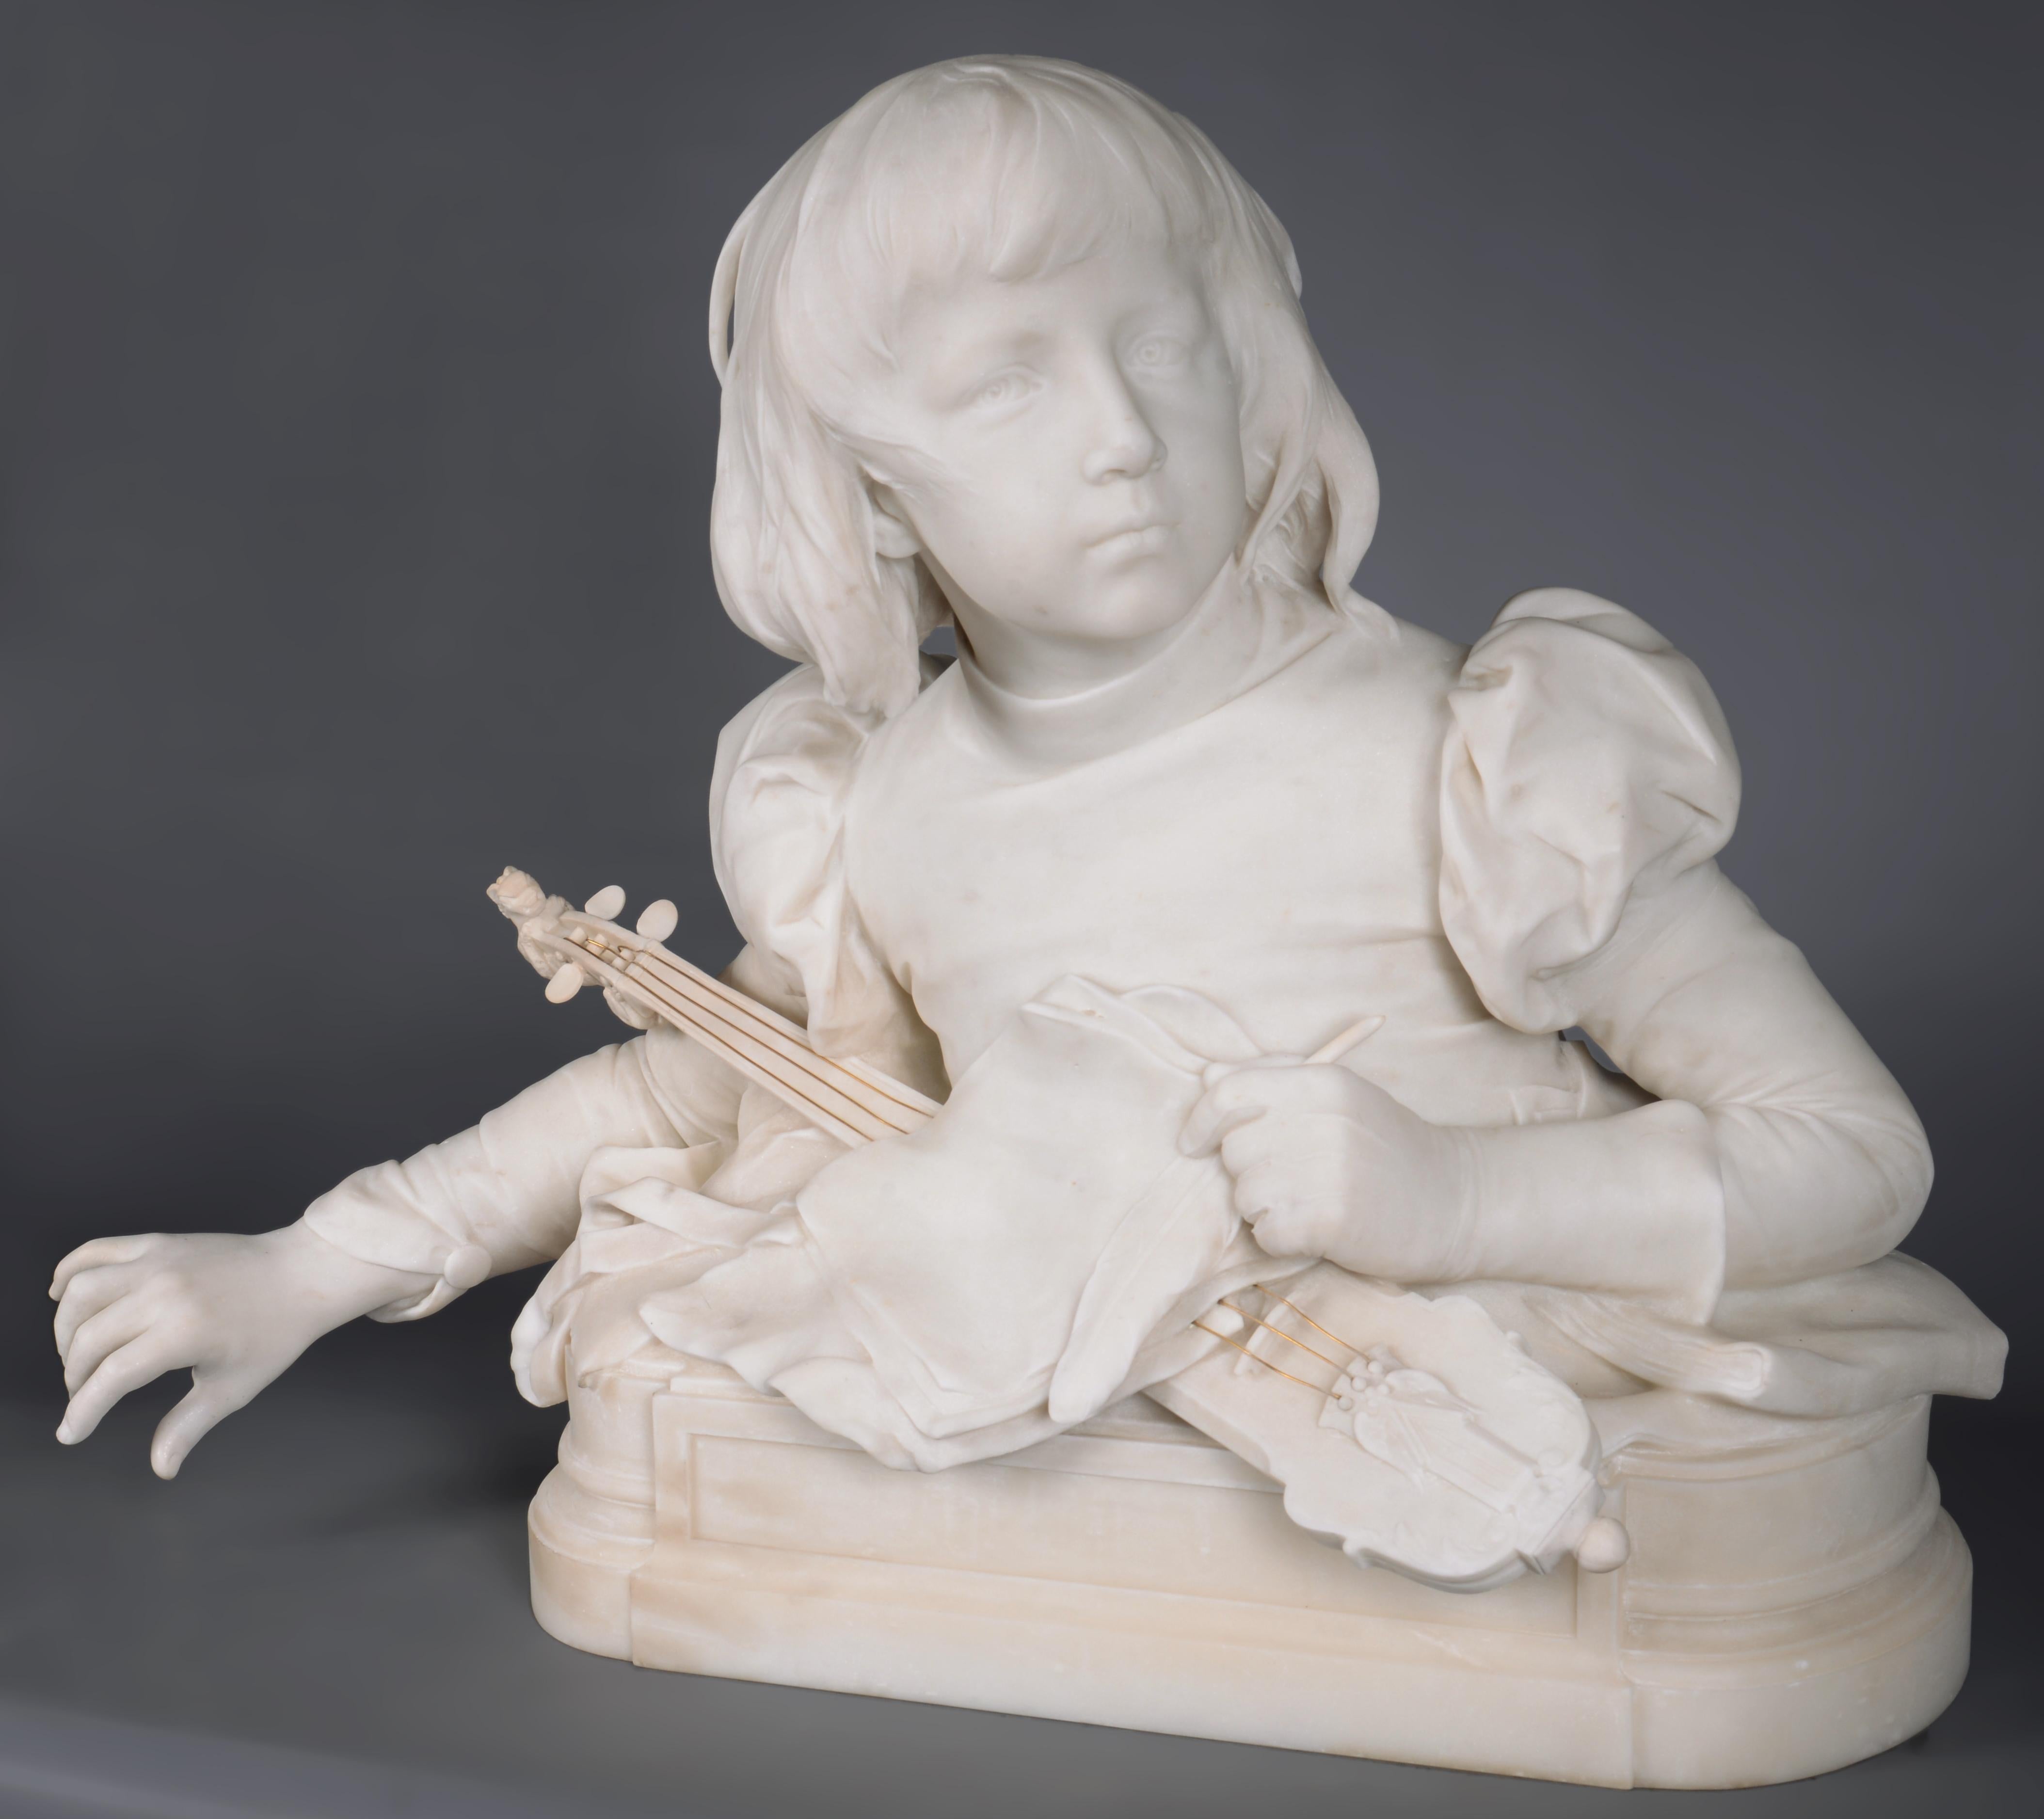 This statuary marble sculpture was made in the last decades of the 19th century by the French sculptor René Rozet. He is mastering in sculpted bust portraits when he designs this very fine marble sculpture of a young musician. His haircut and outfit